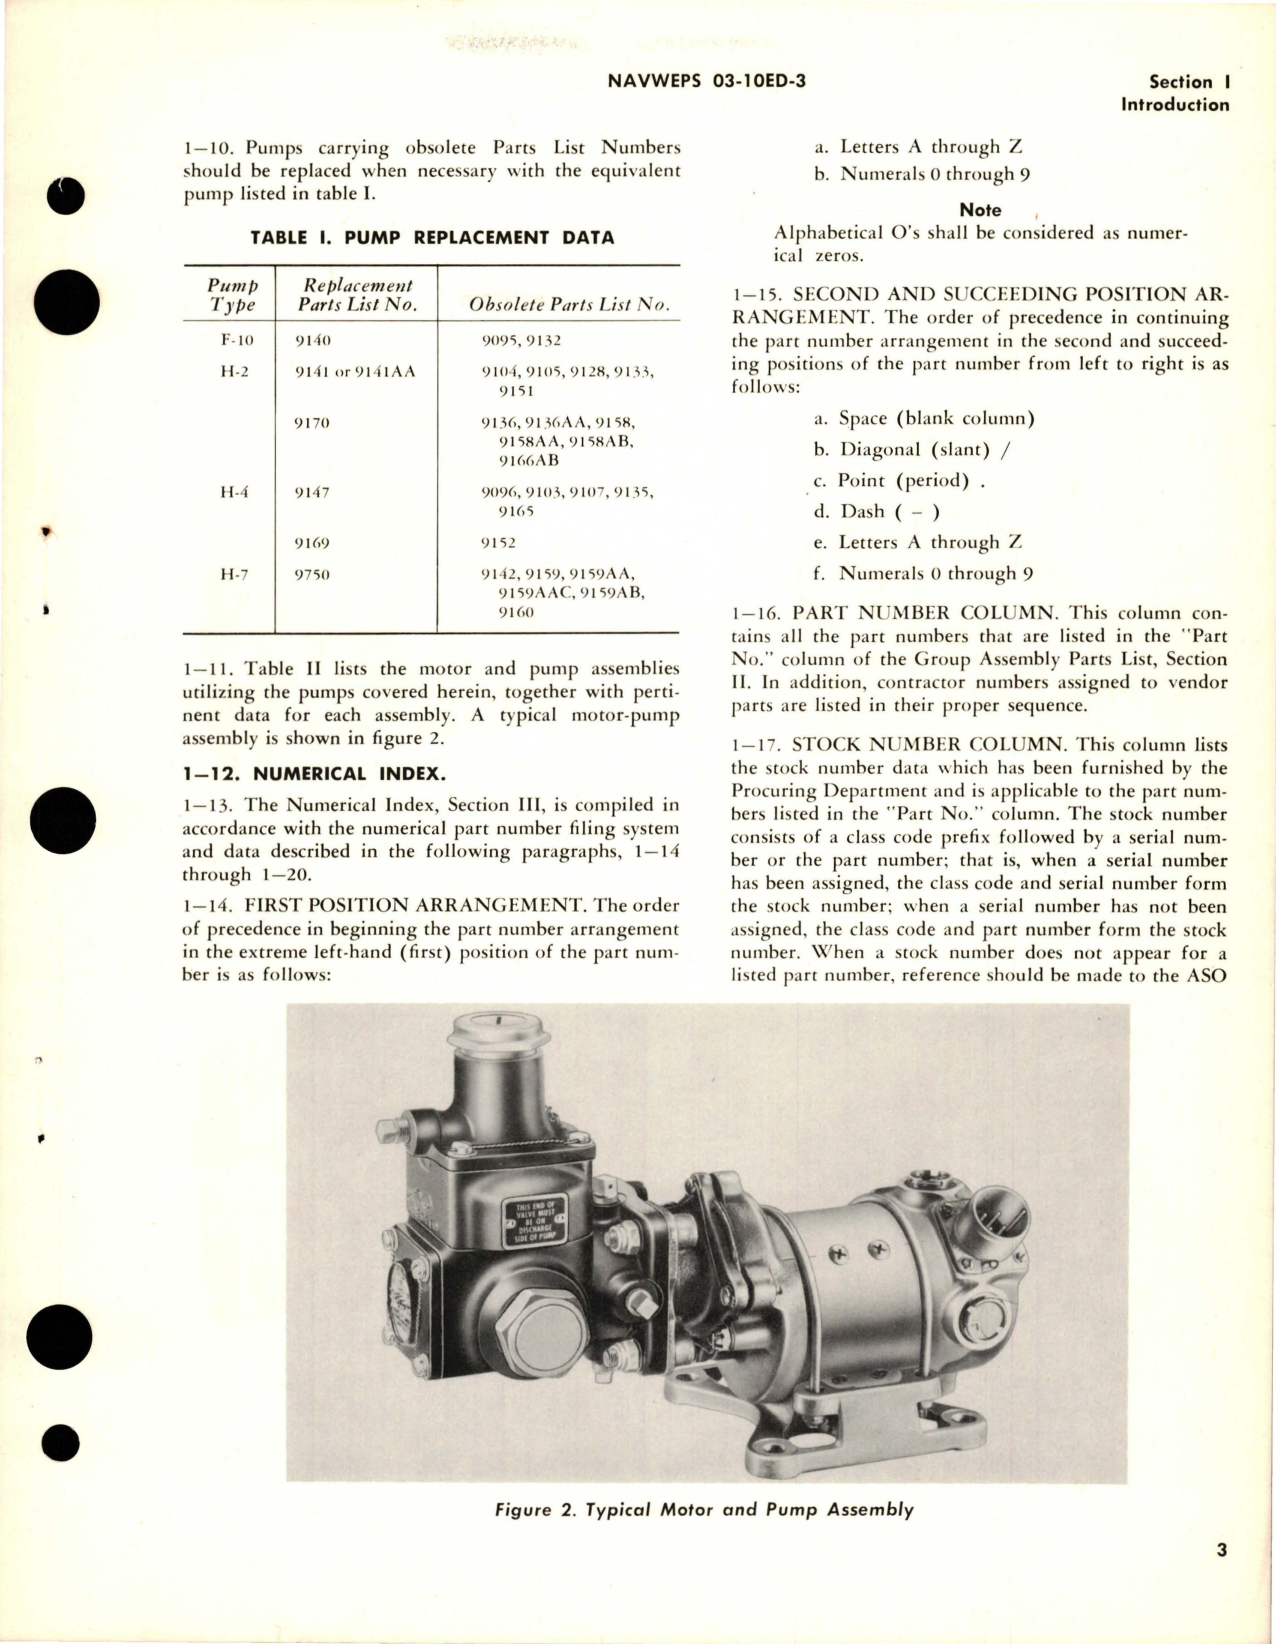 Sample page 5 from AirCorps Library document: Illustrated Parts Breakdown for Fuel and Water Pumps - Types F-10, H-2, H-4 and H-7